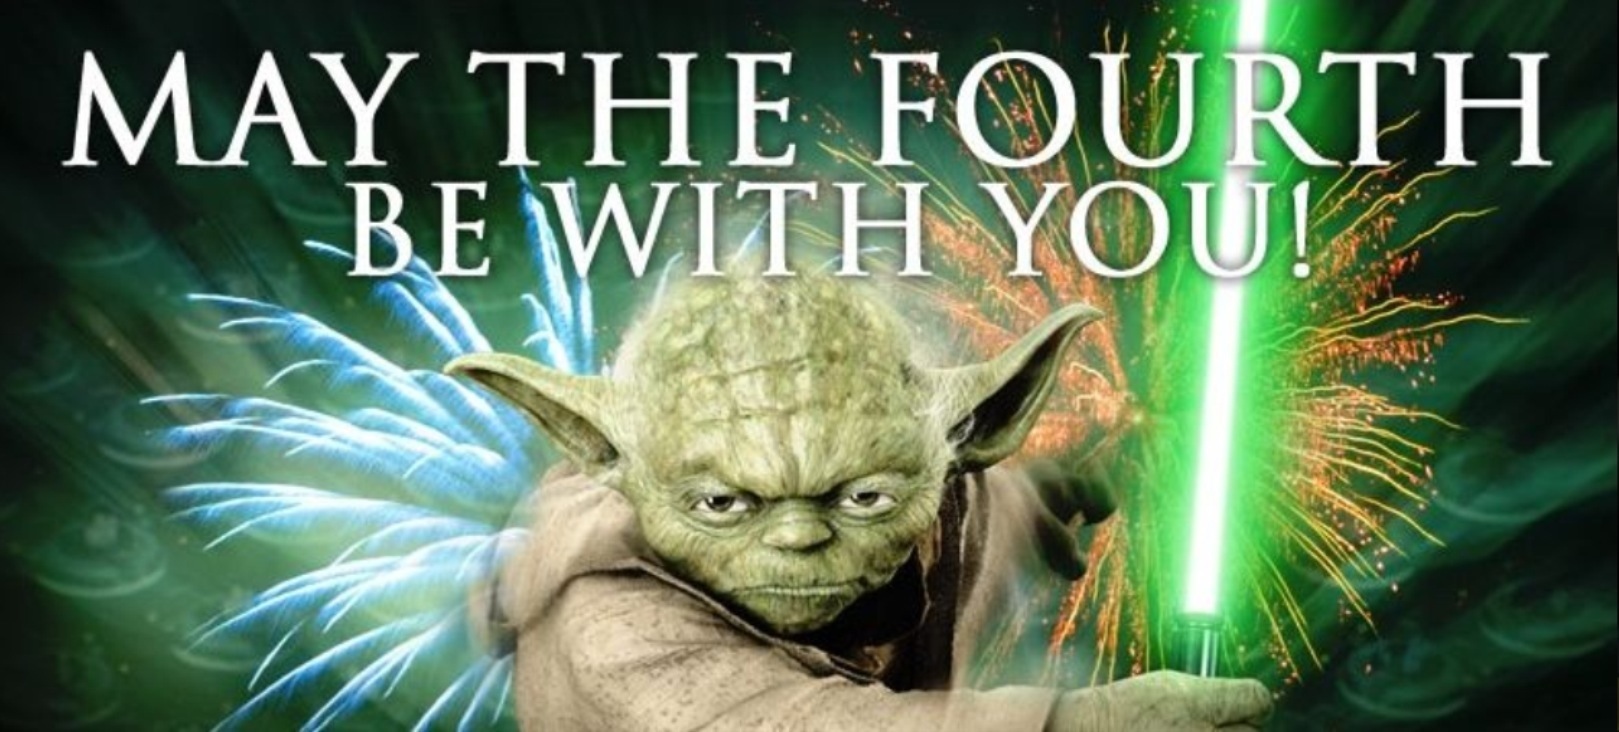 may the fourth be with you meme